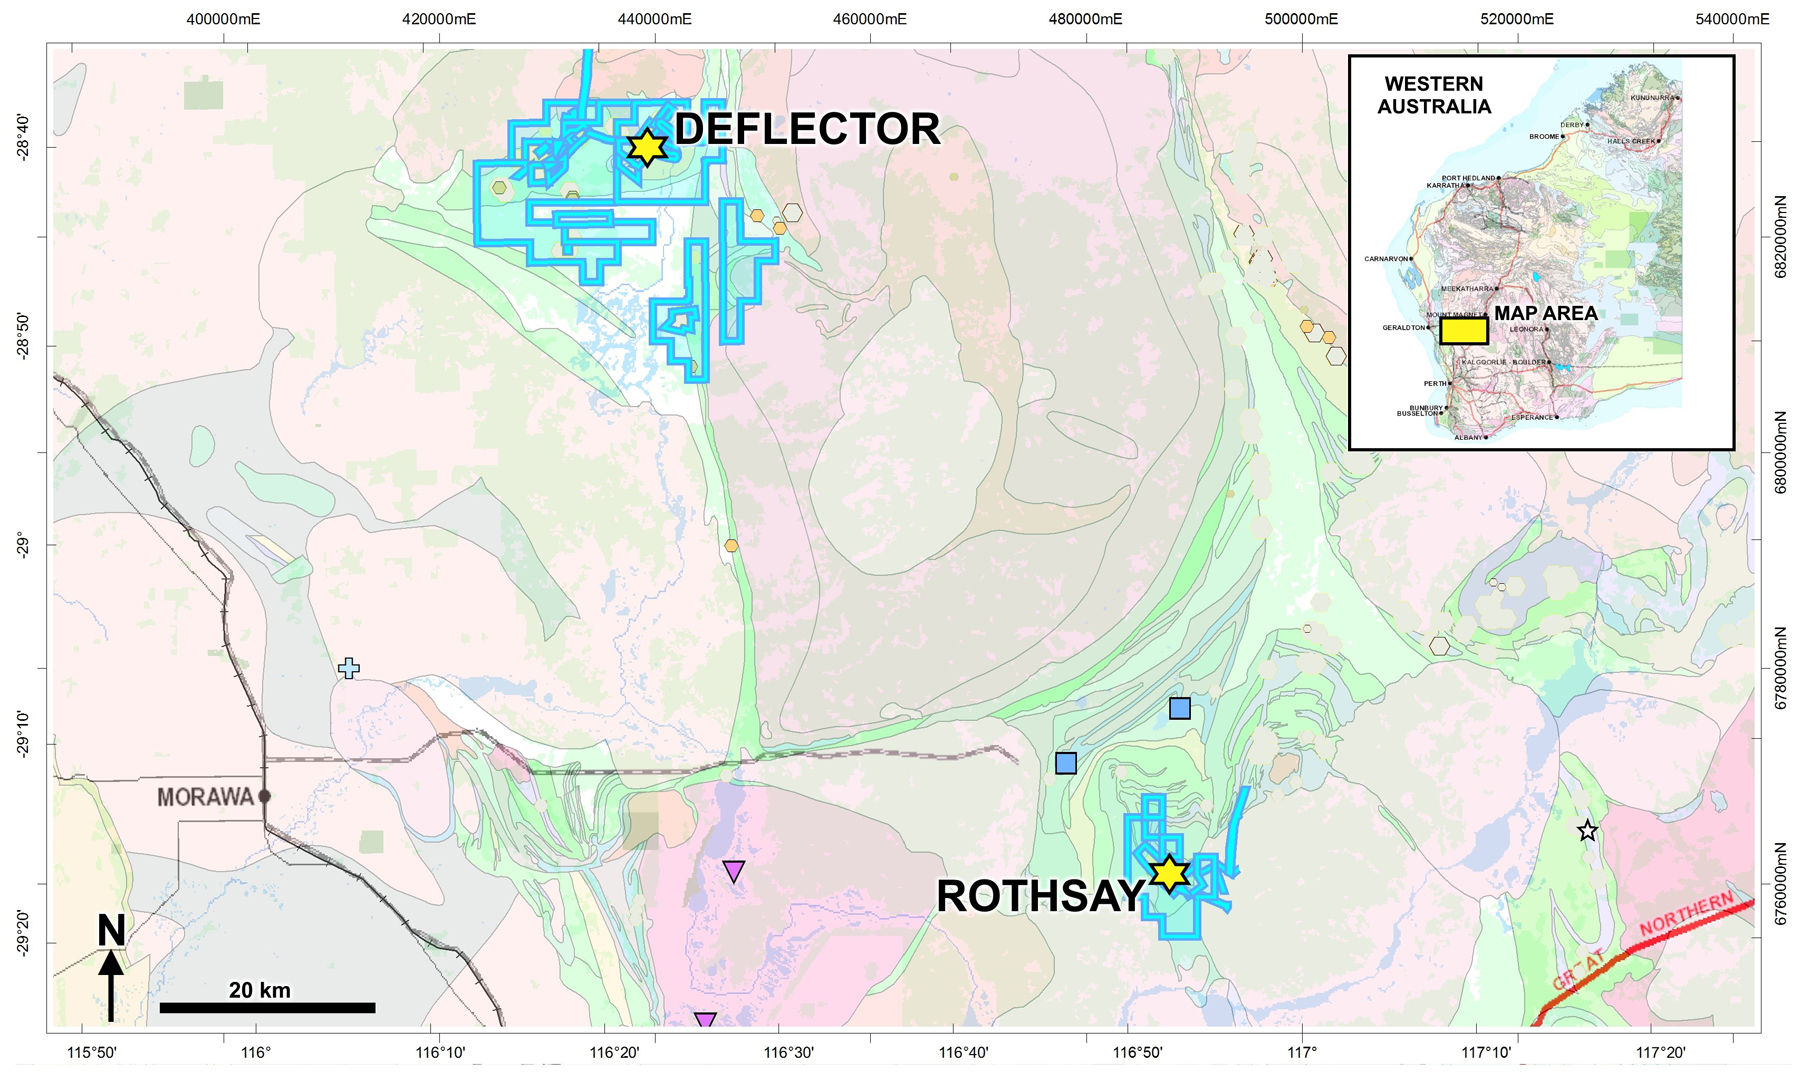 The Rothsay gold mine map